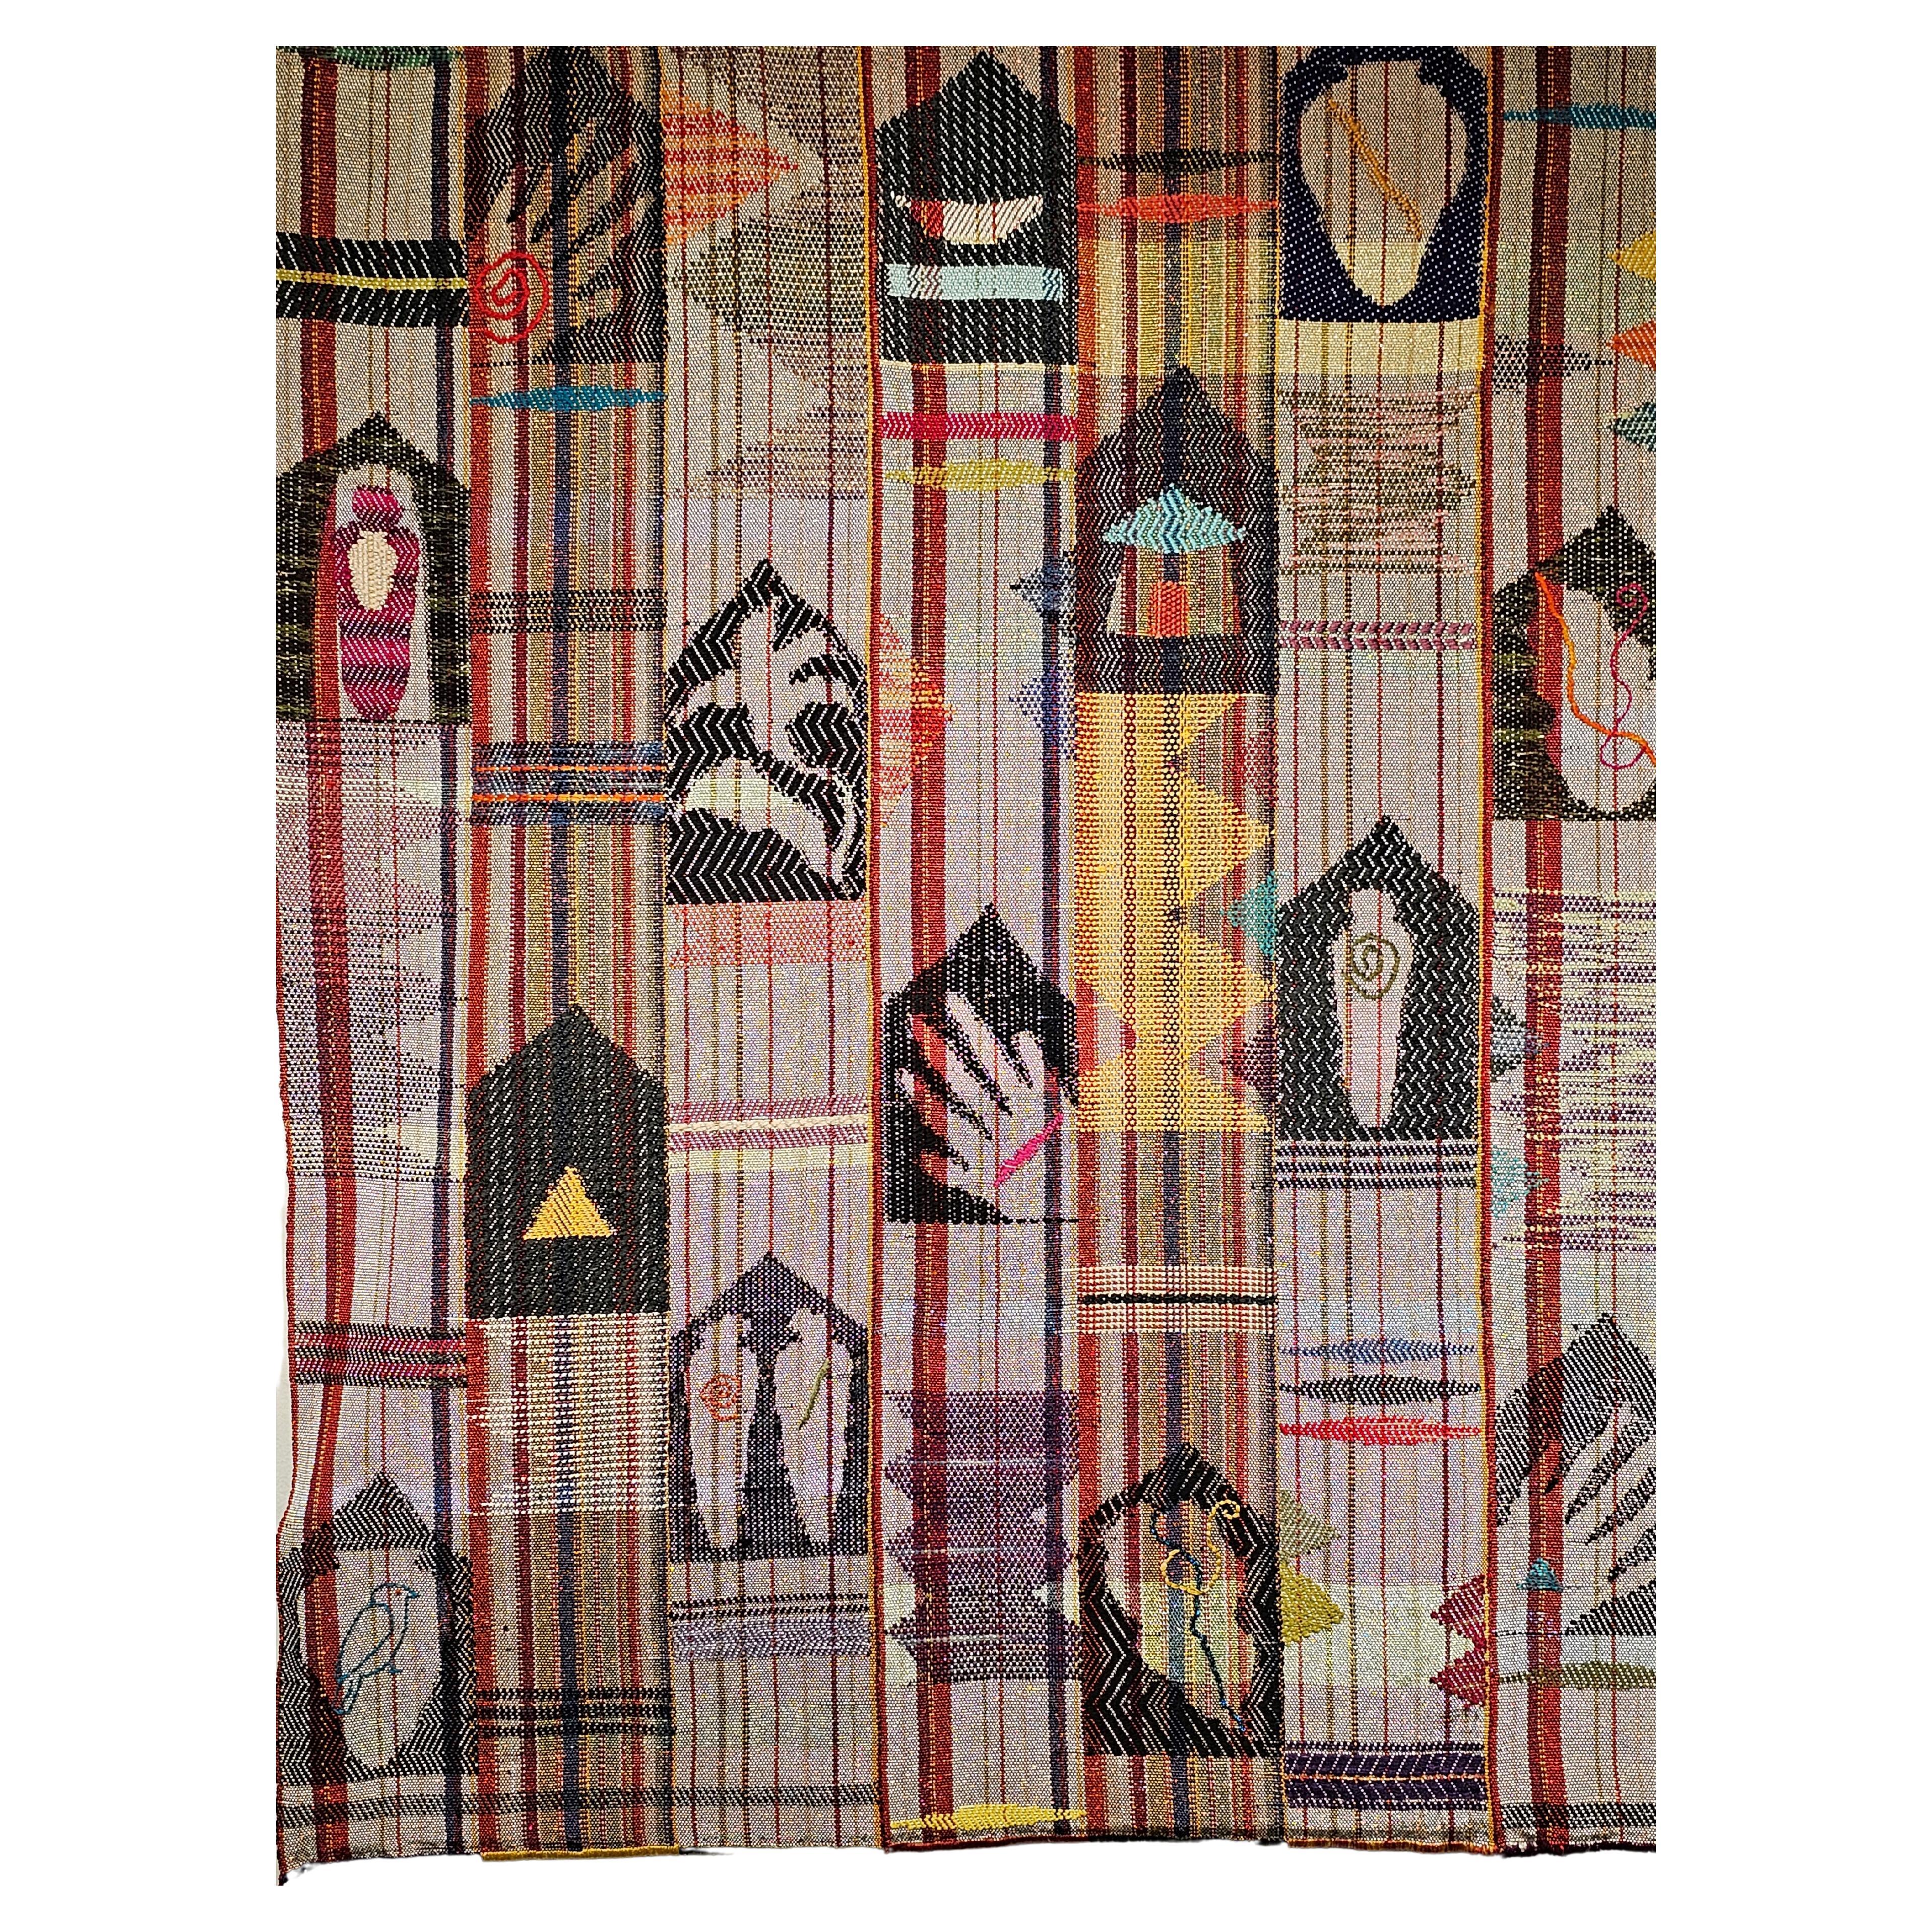 Vintage Modern Design Handwoven Textile Tapestry Wall Art with Figural Forms